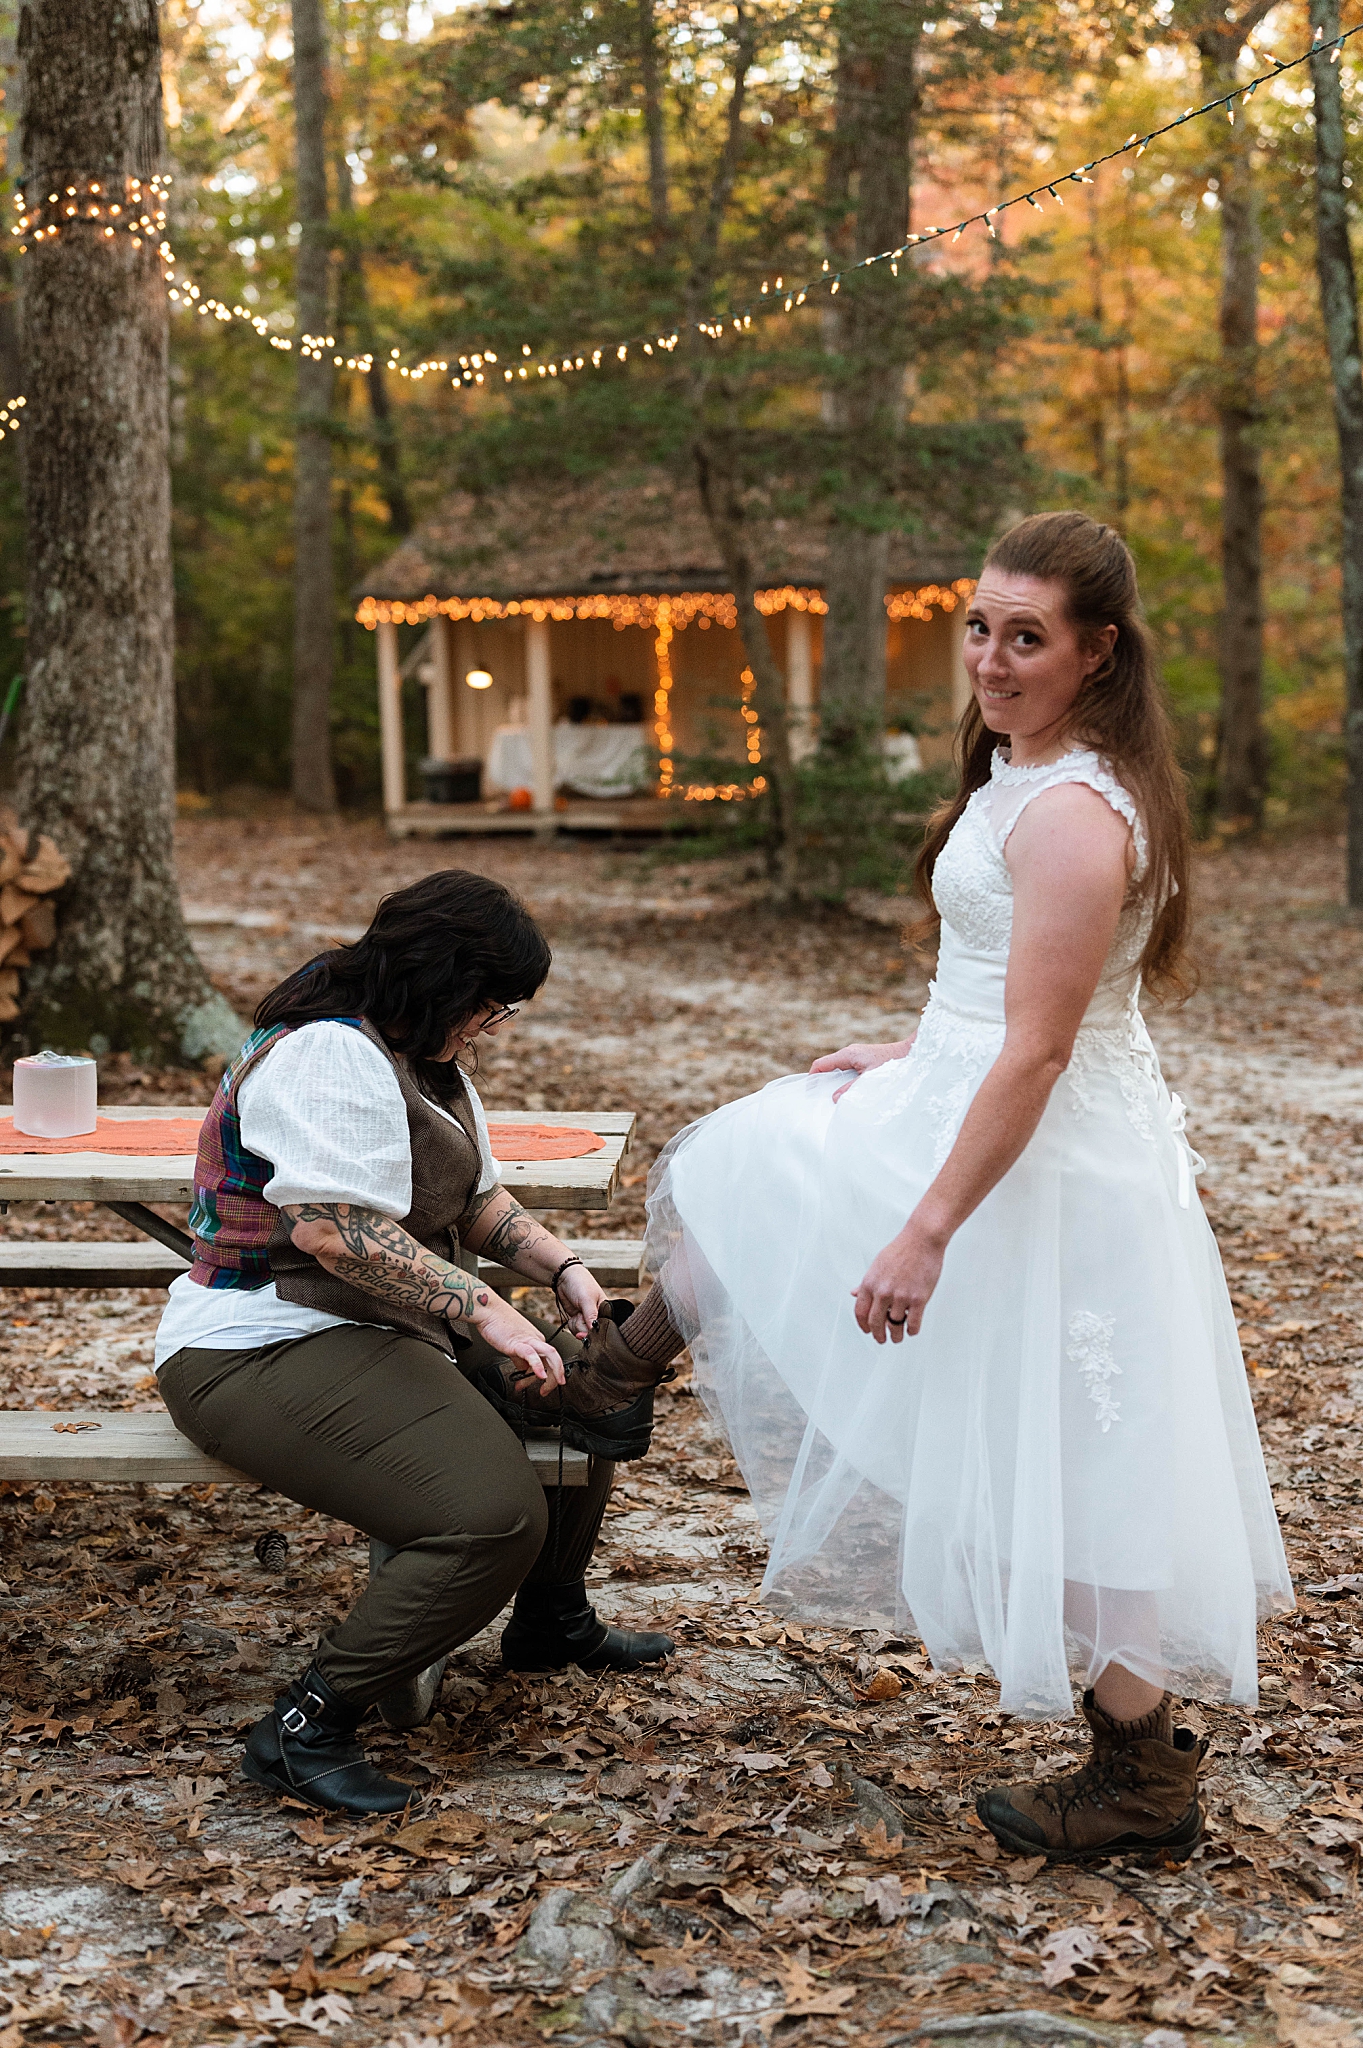 wife ties wife's shoe at vow renewal